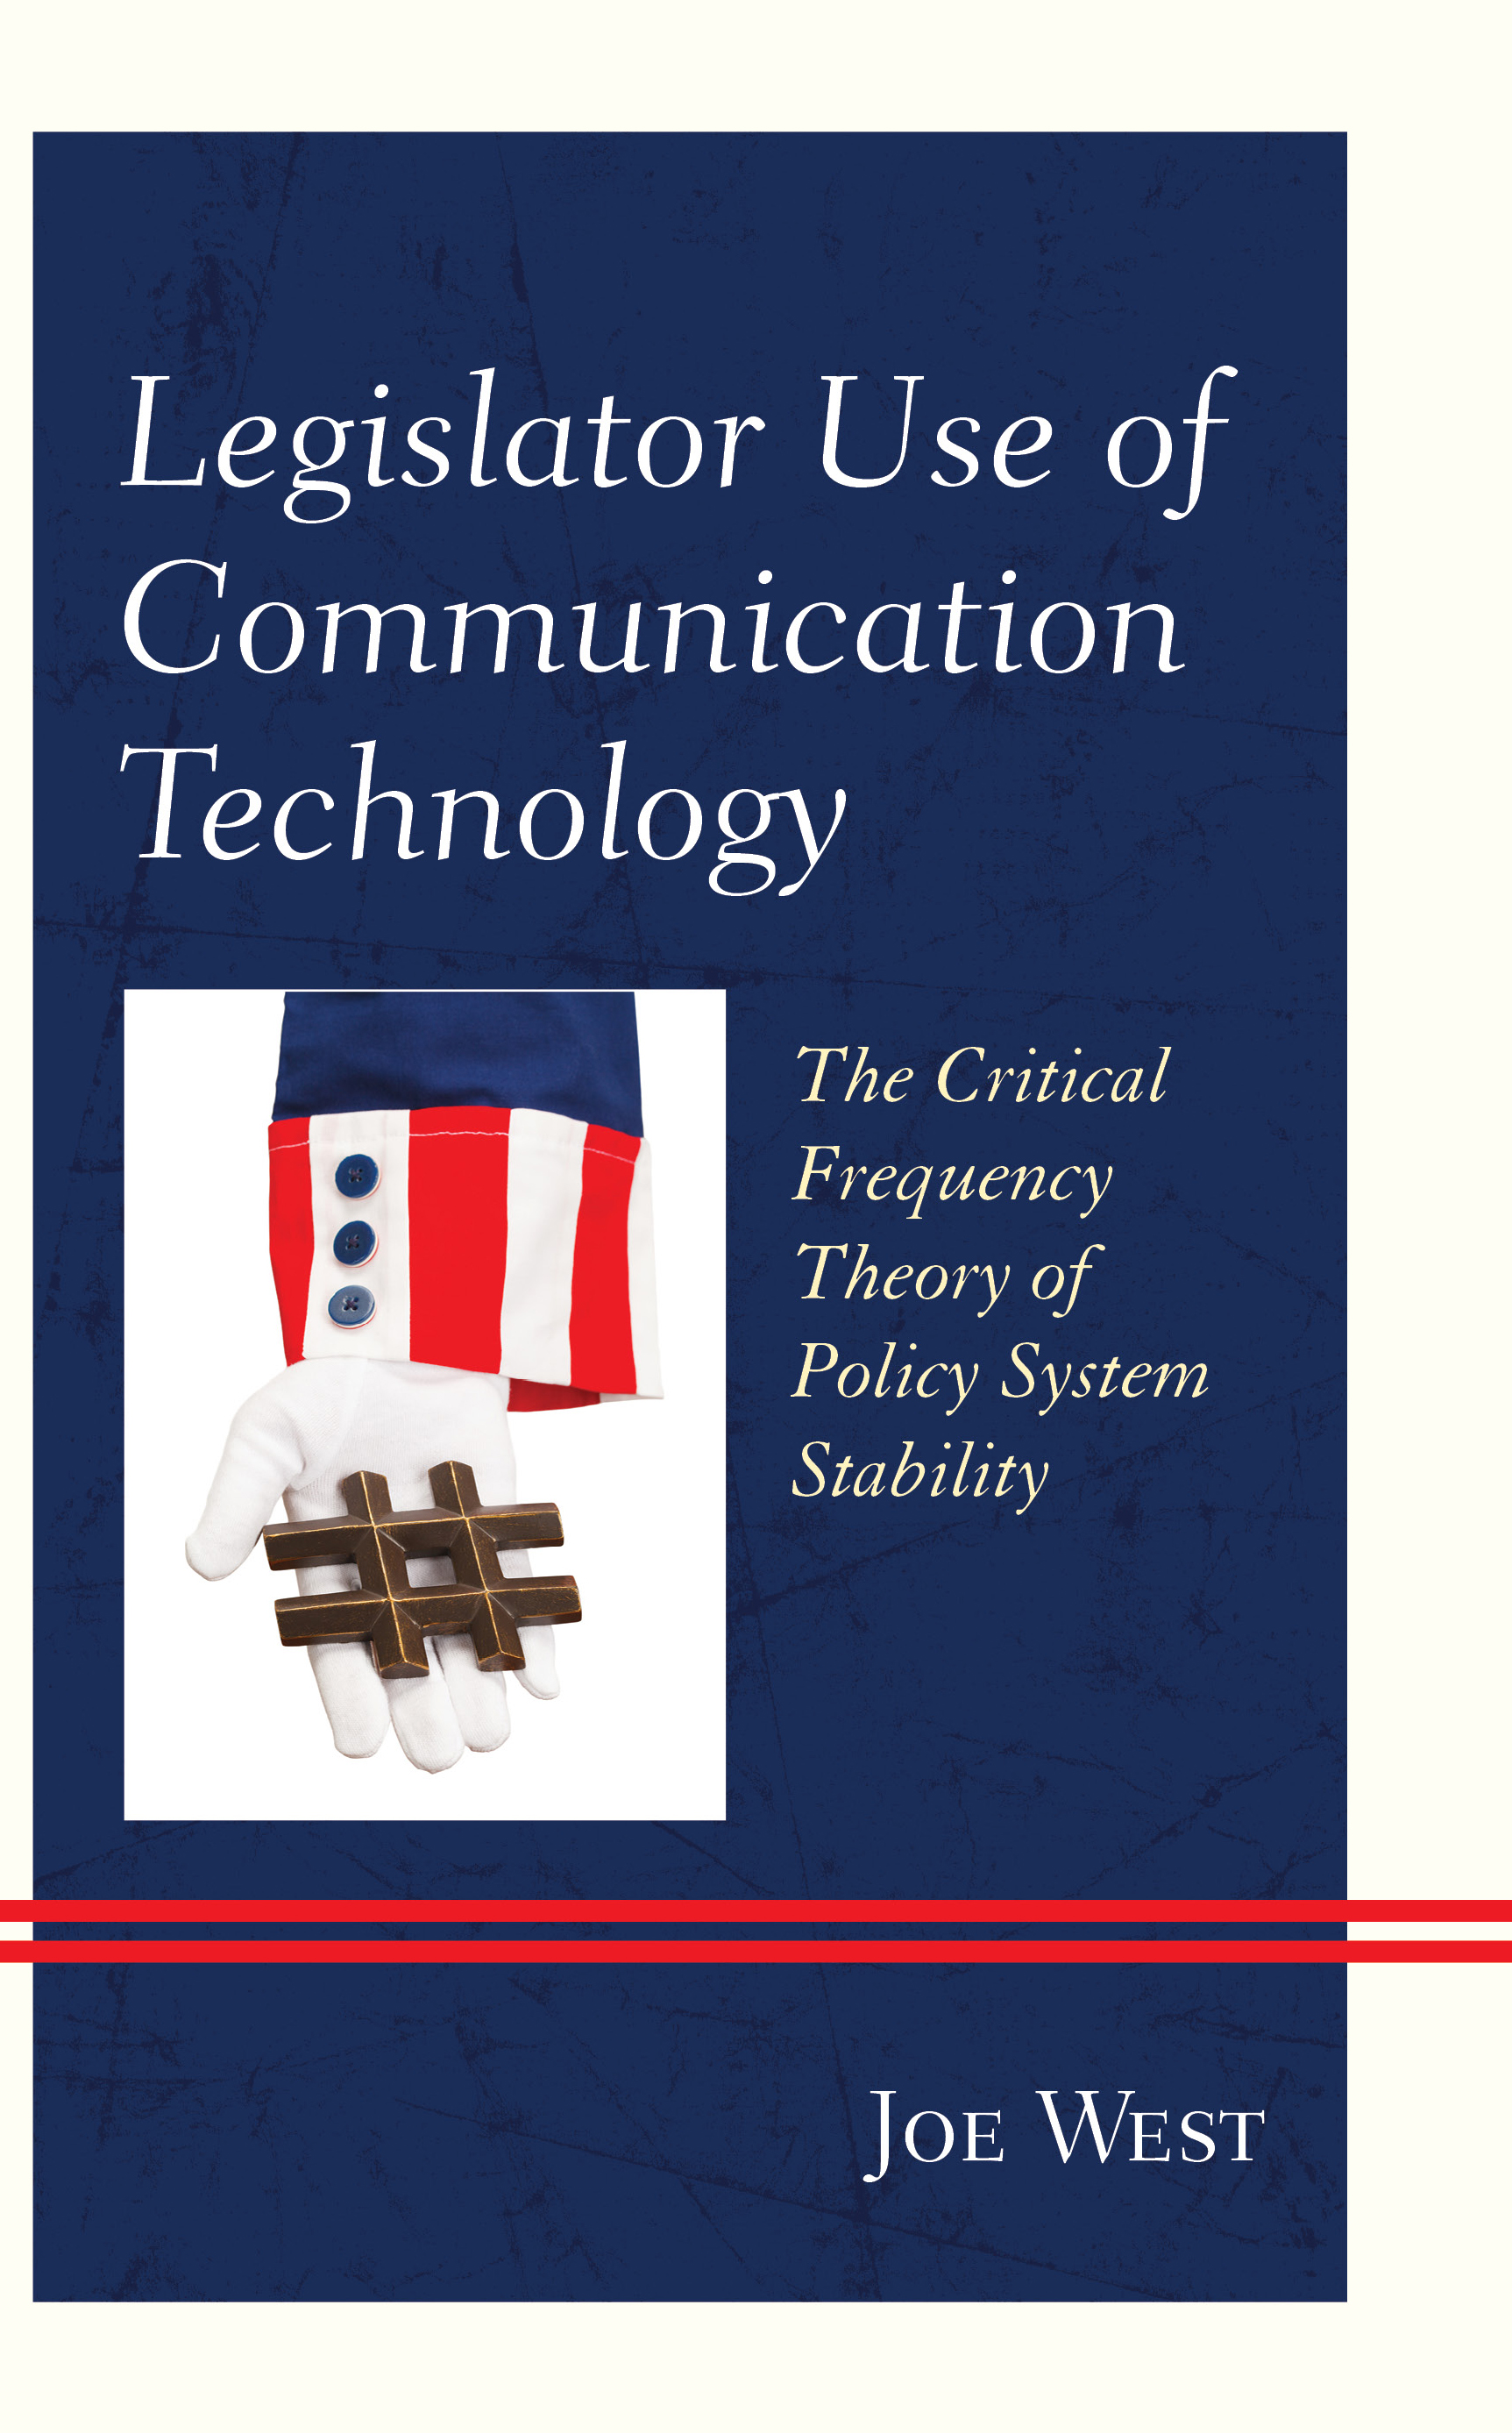 Legislator Use of Communication Technology: The Critical Frequency Theory of Policy System Stability